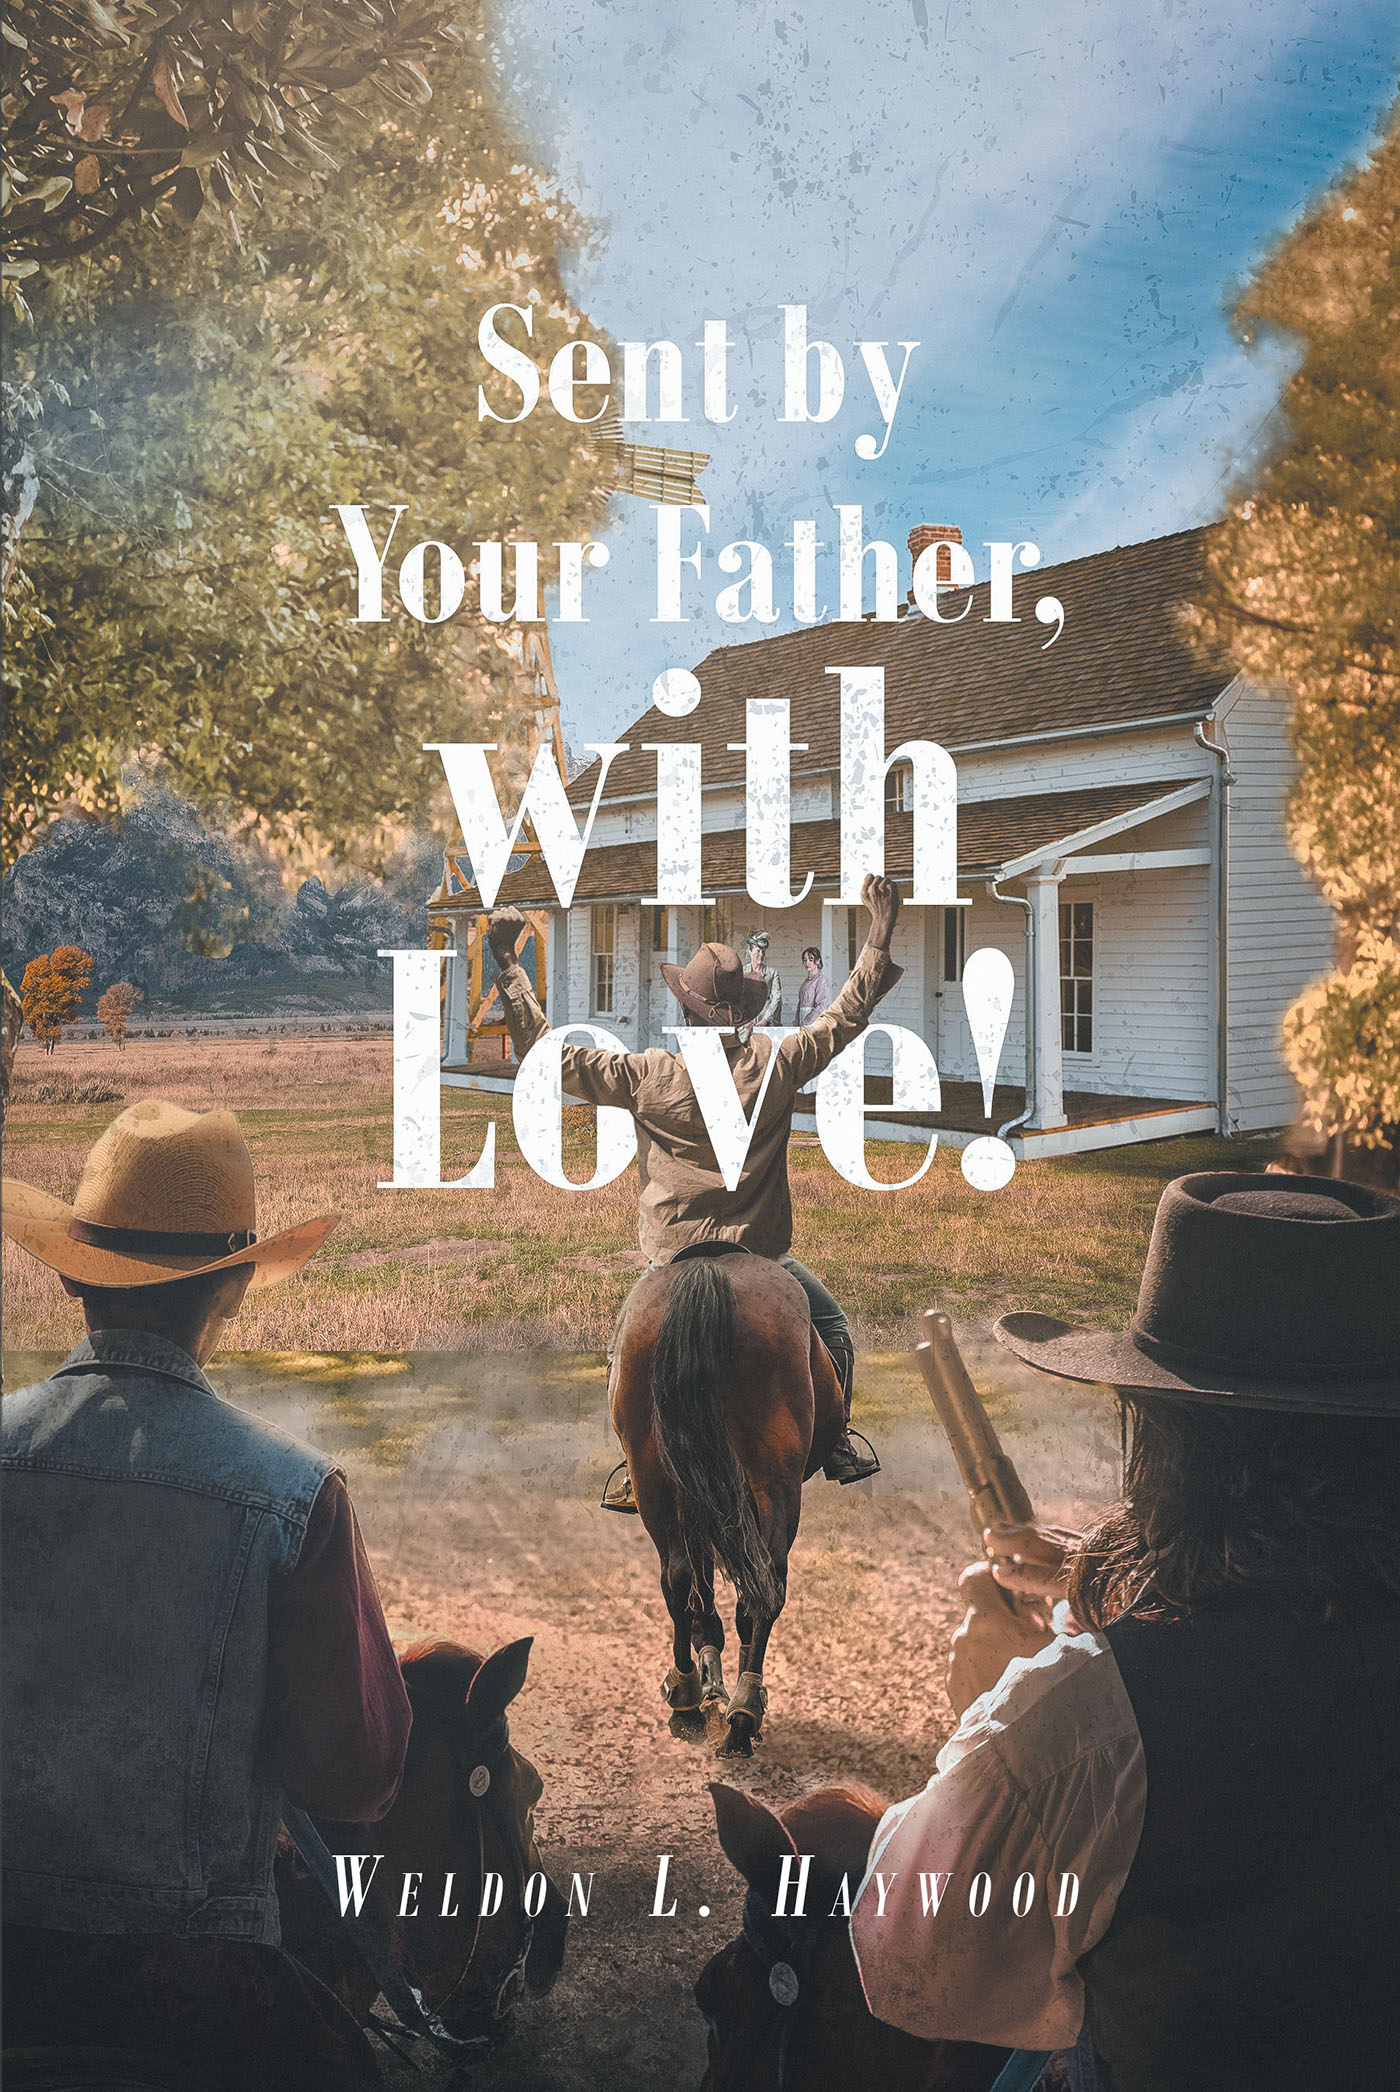 Weldon L. Haywood’s New Book, "Sent by Your Father, with Love!" is a Spellbinding Mystery Tied to Events and an Affair from Twenty Years Ago and the Fallout It Created